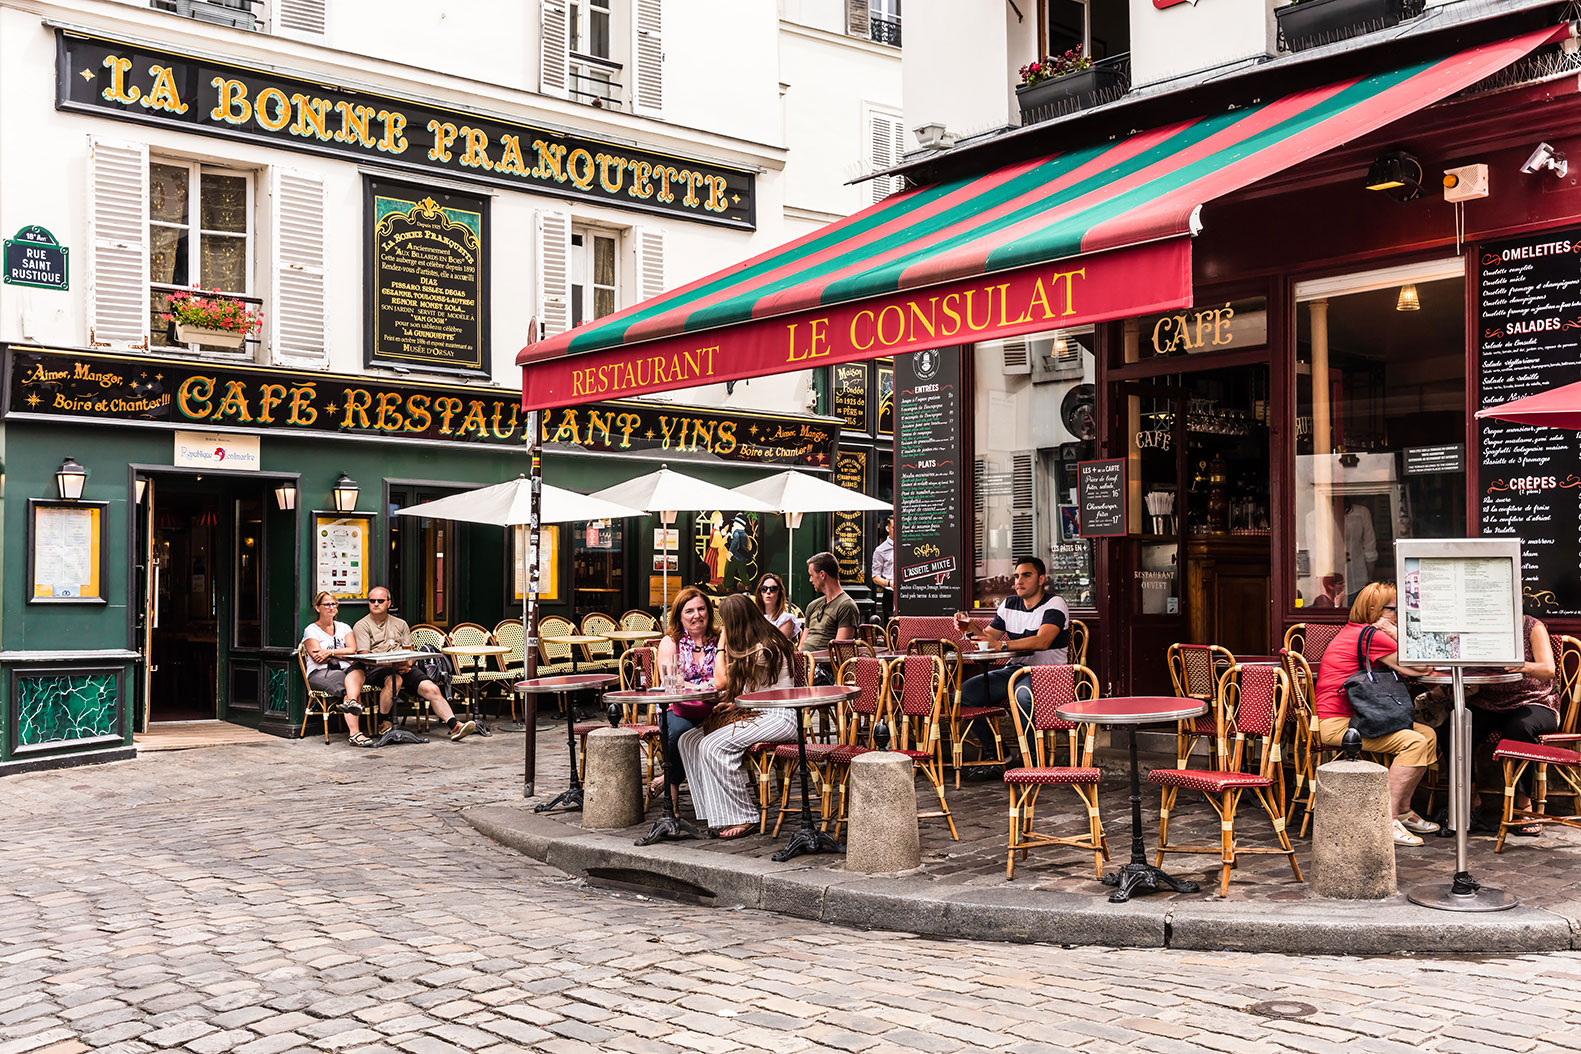 Le Consulat on the Montmartre.